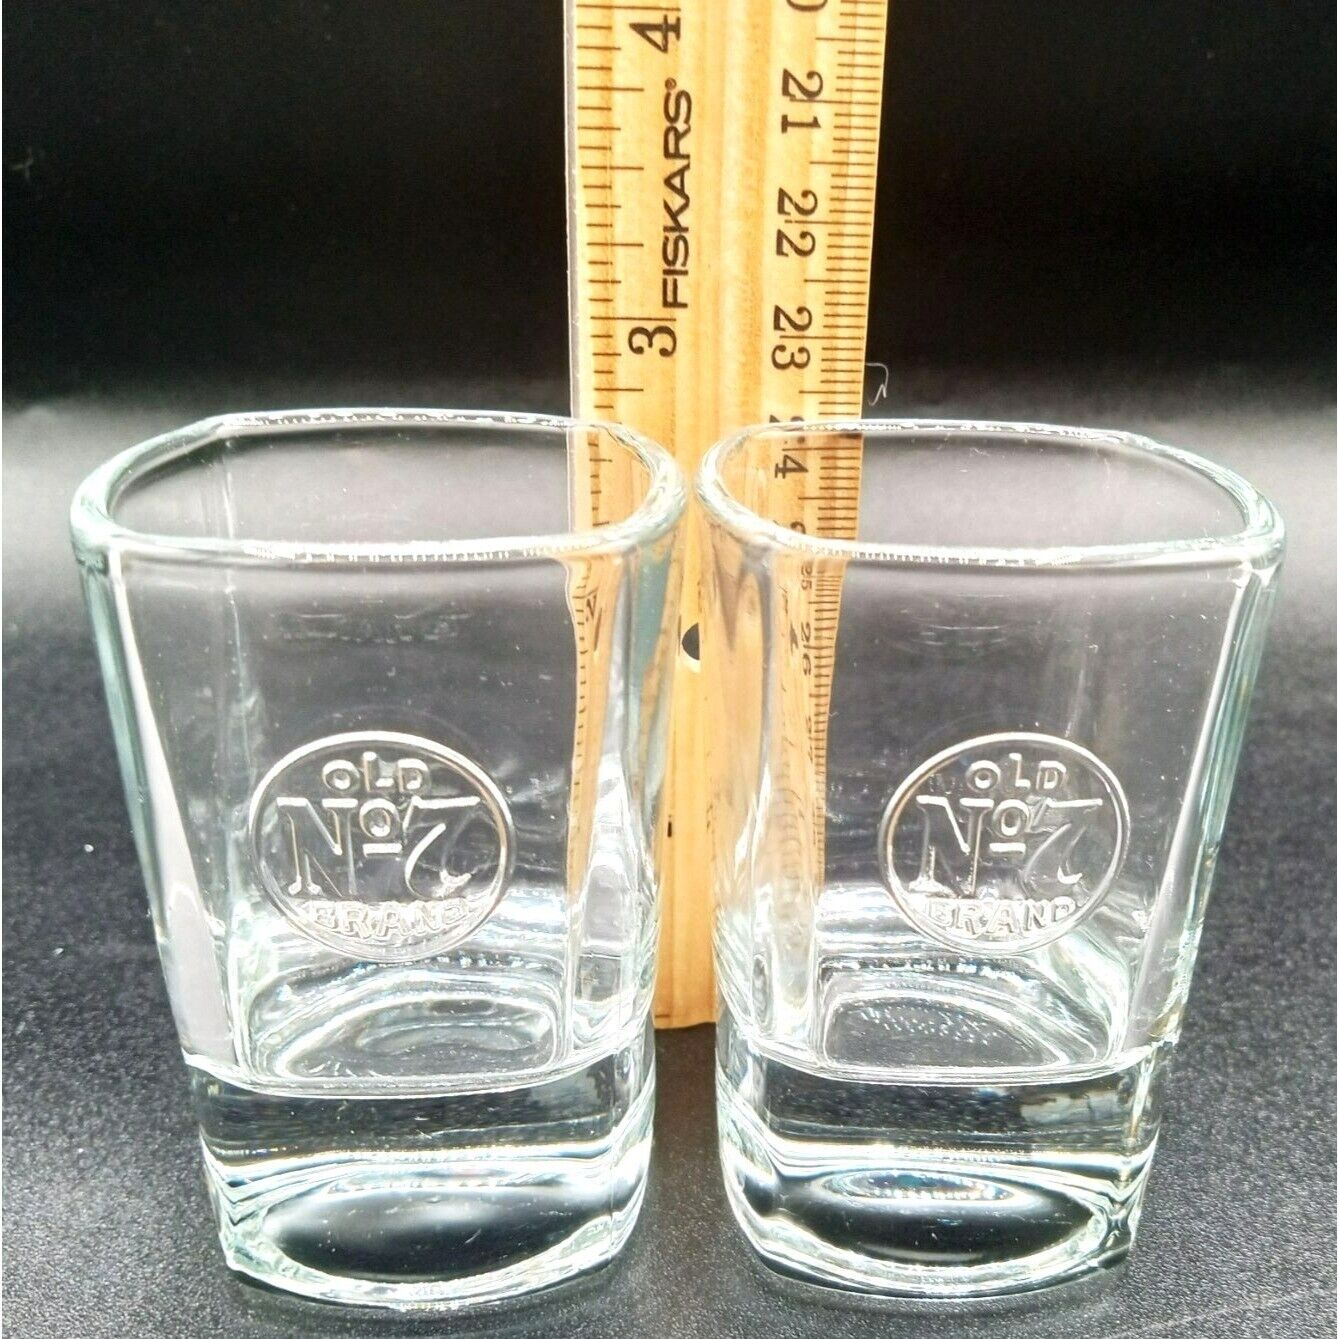 Pair of Jack Daniels Old No 7 2.75 Inch Drinking Shot Glasses Barware 2 Ounce